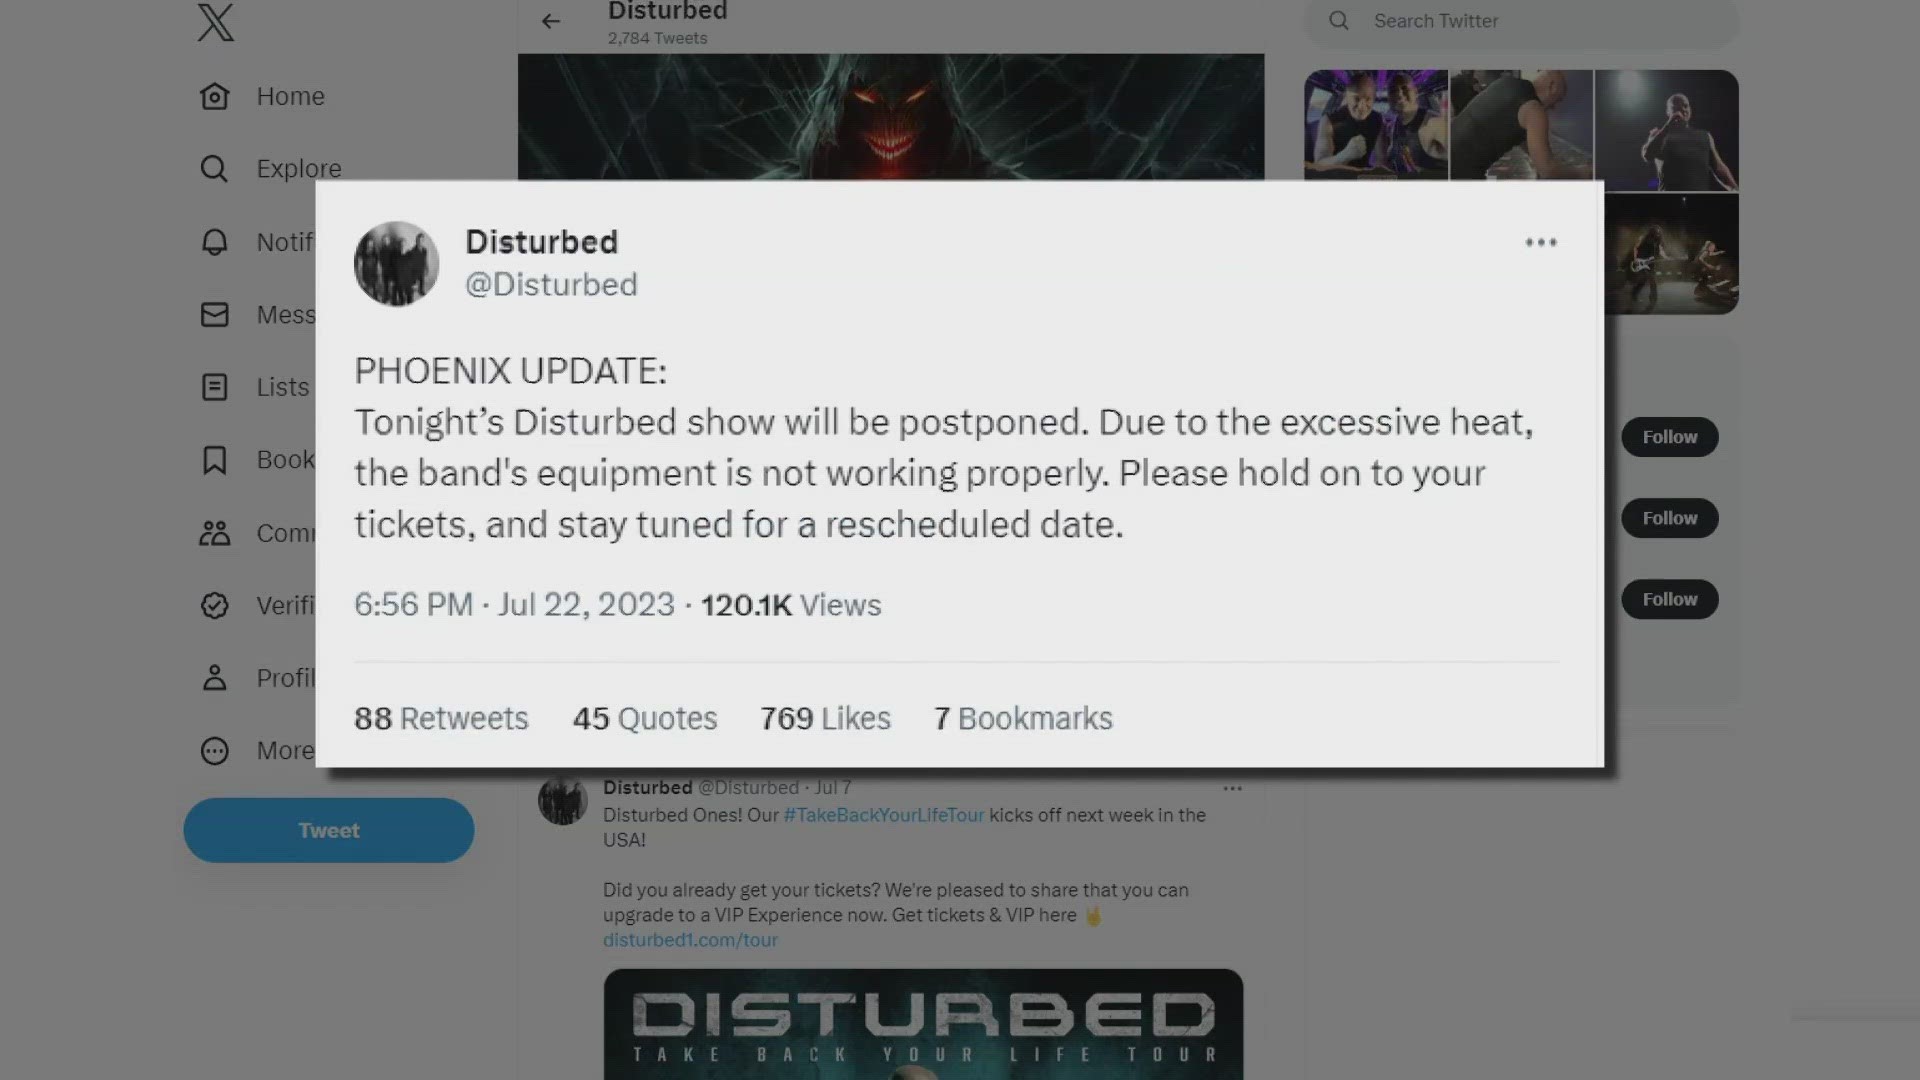 The Disturbed had to cancel their show completely because their equipment couldn’t handle the extreme heat.